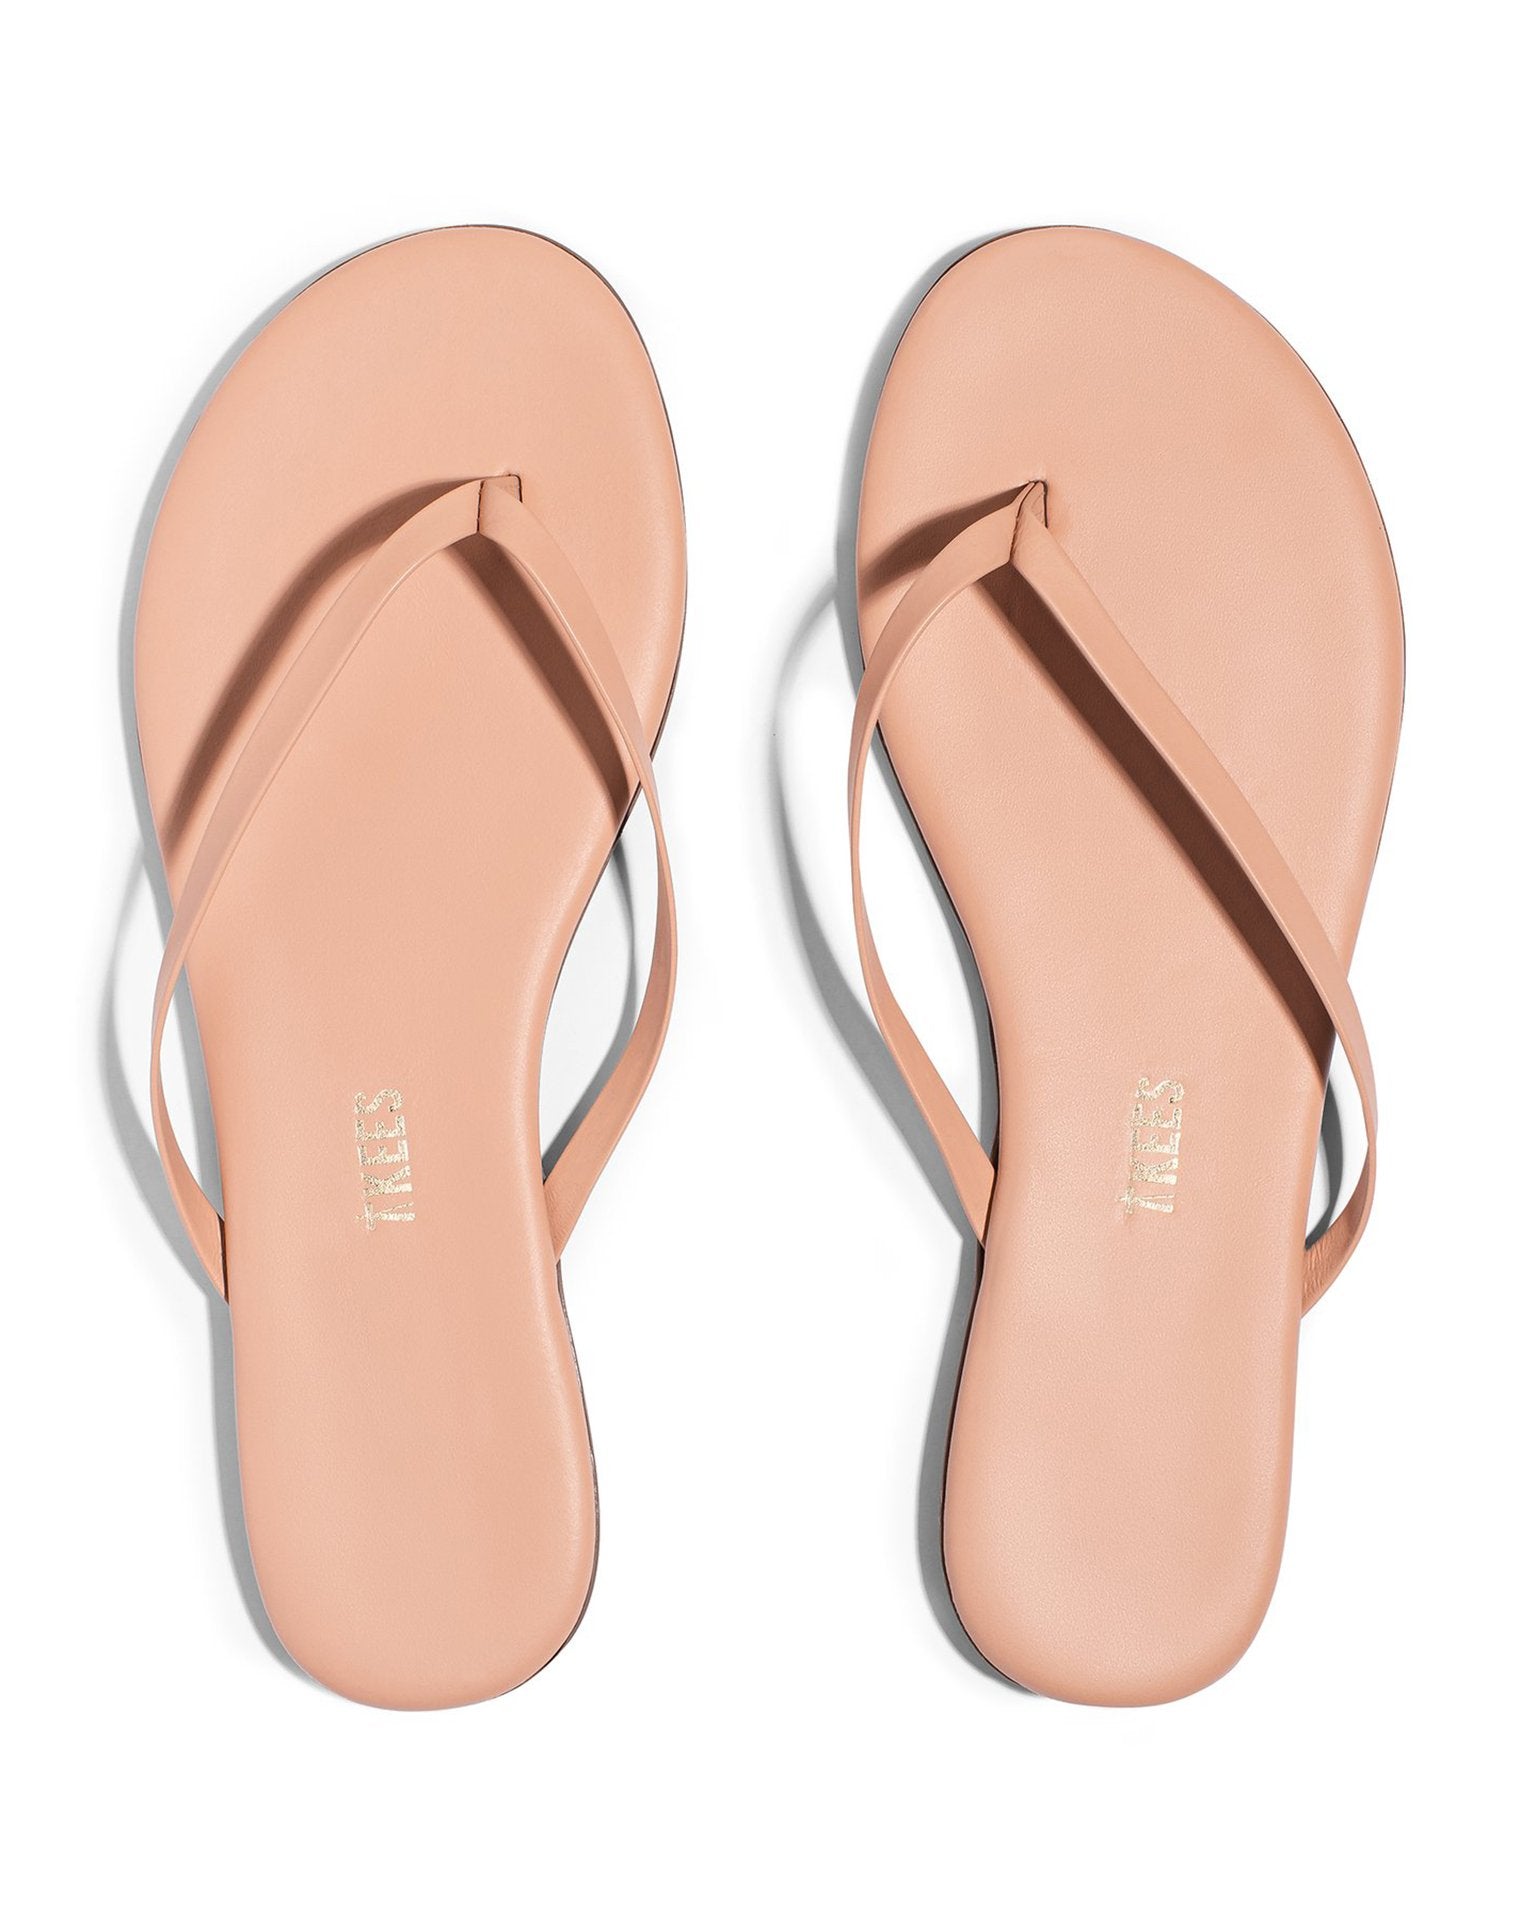 Tkees Nudes Flip Flop in Nude Beach - Bliss Boutiques